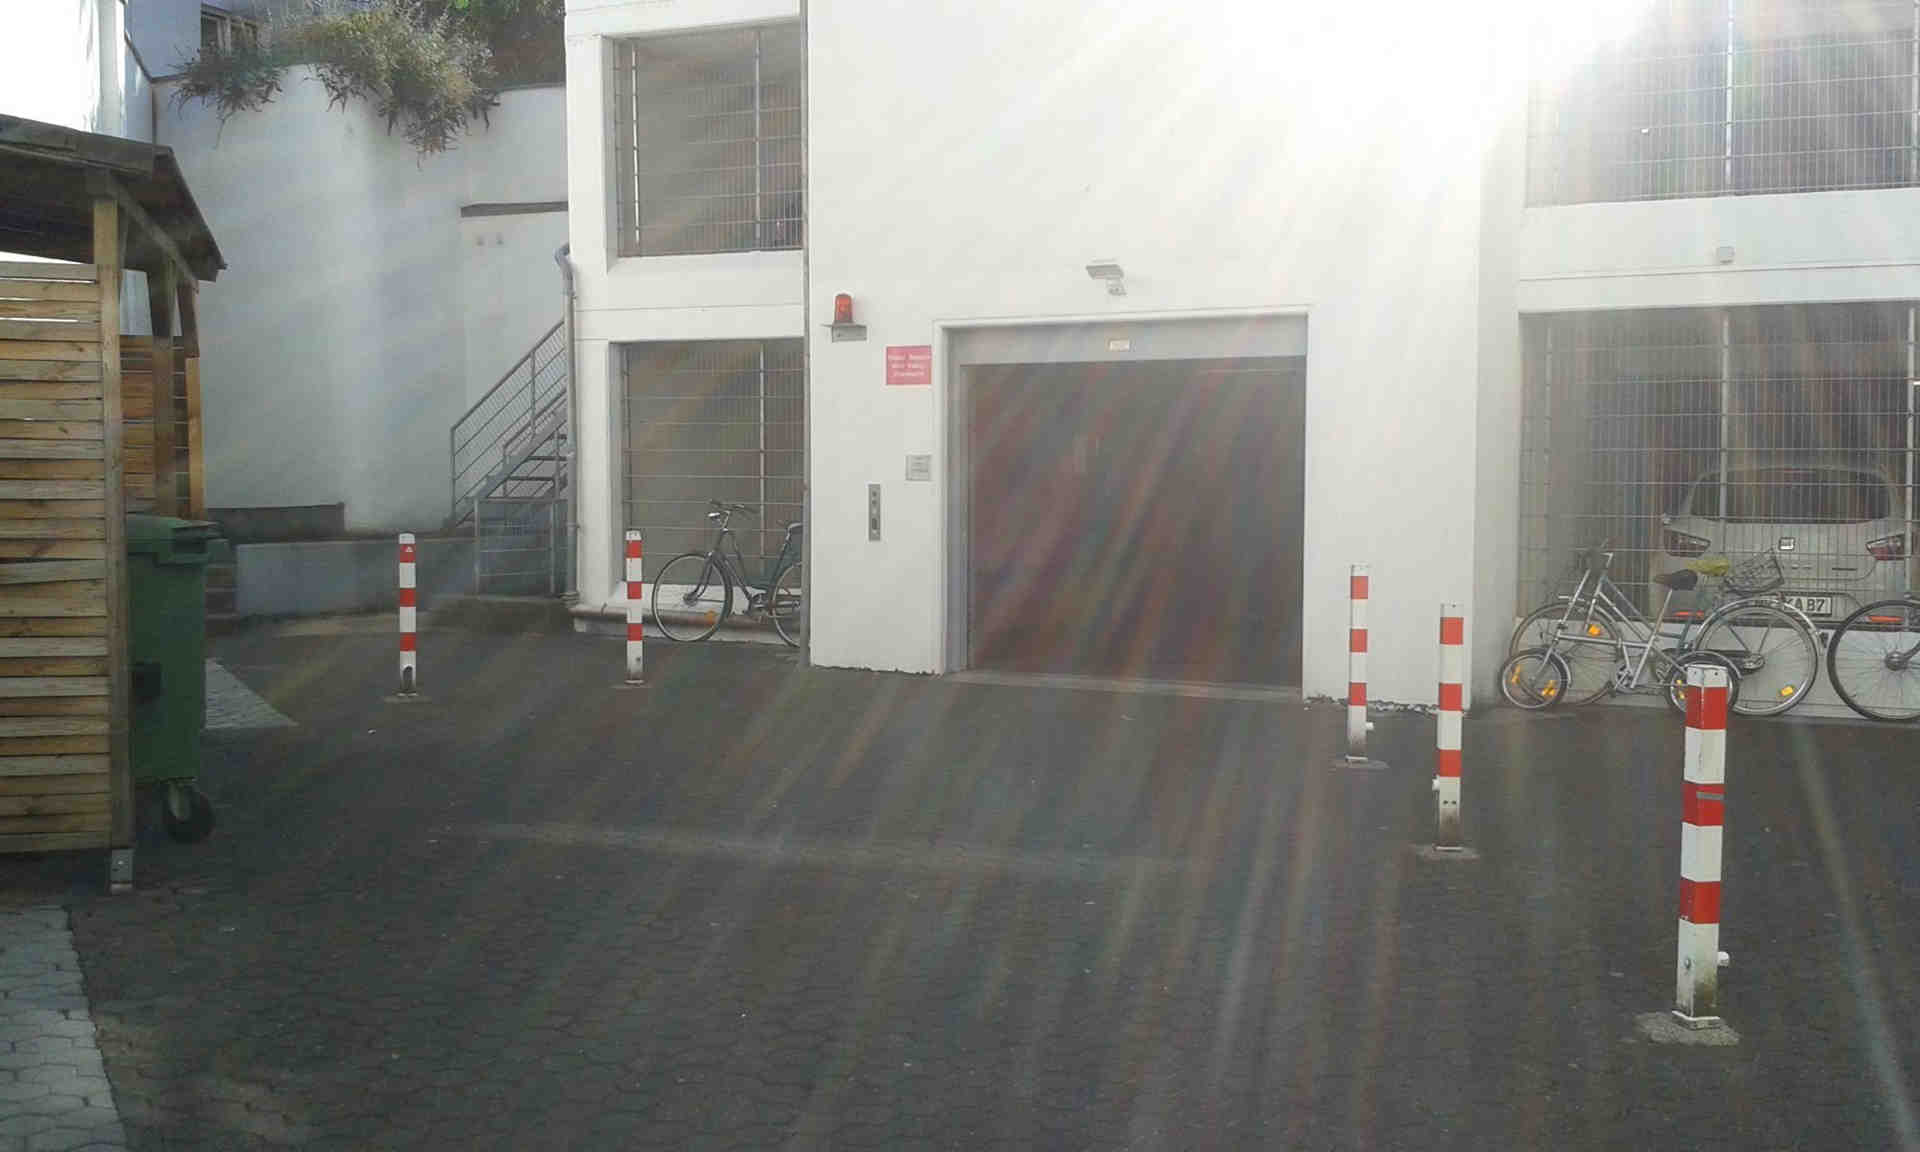 Parking space/garage in the basement in Cologne city centre (Zülpi/Barba) - Mauritiuswall, 50676 Cologne - Photo 1 of 1